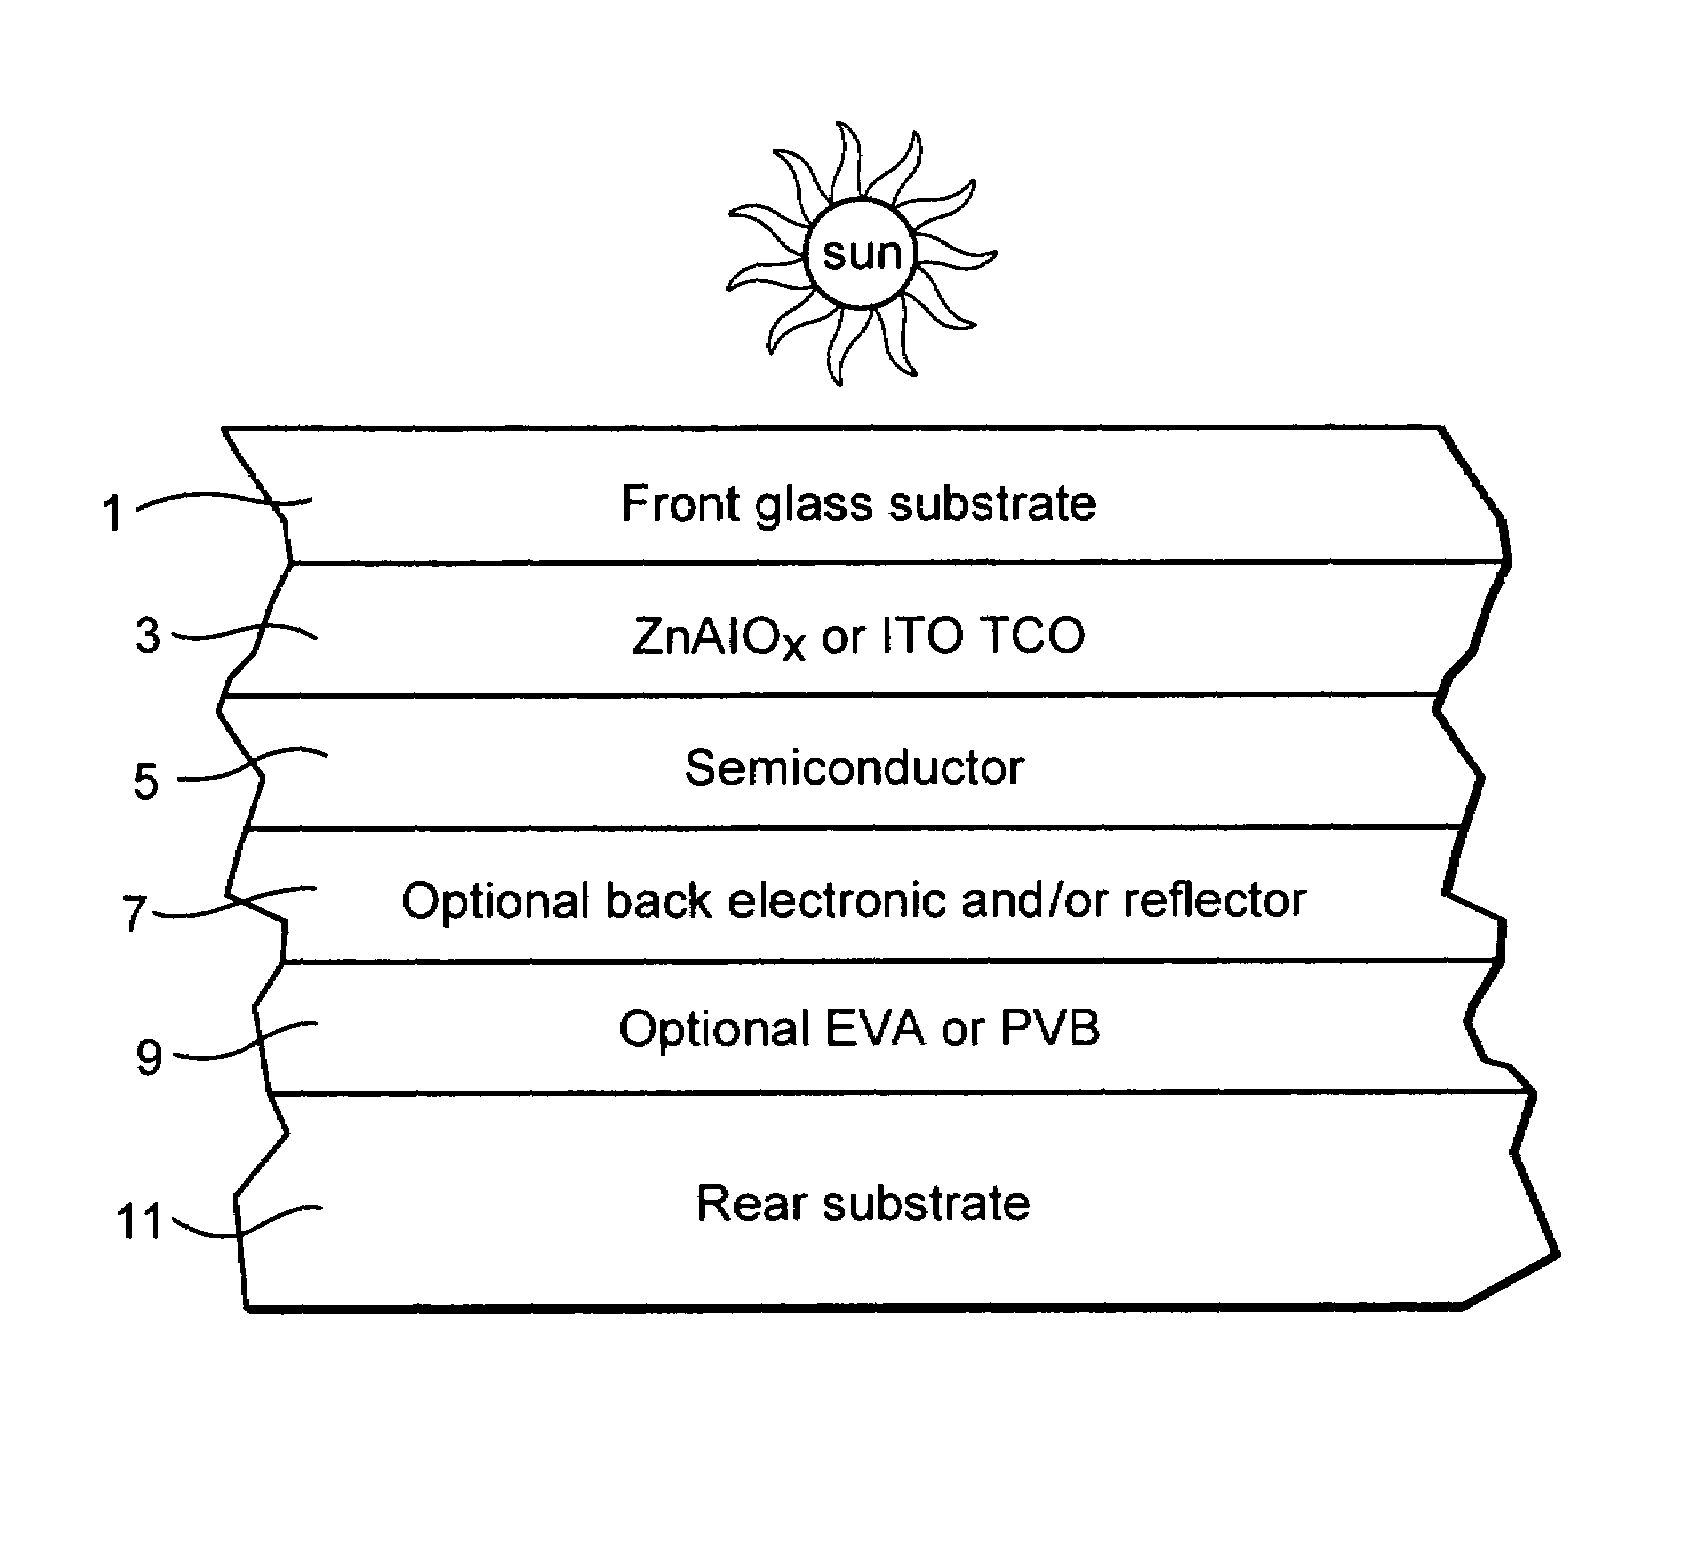 Method of enhancing the conductive and optical properties of deposited indium tin oxide (ITO) thin films